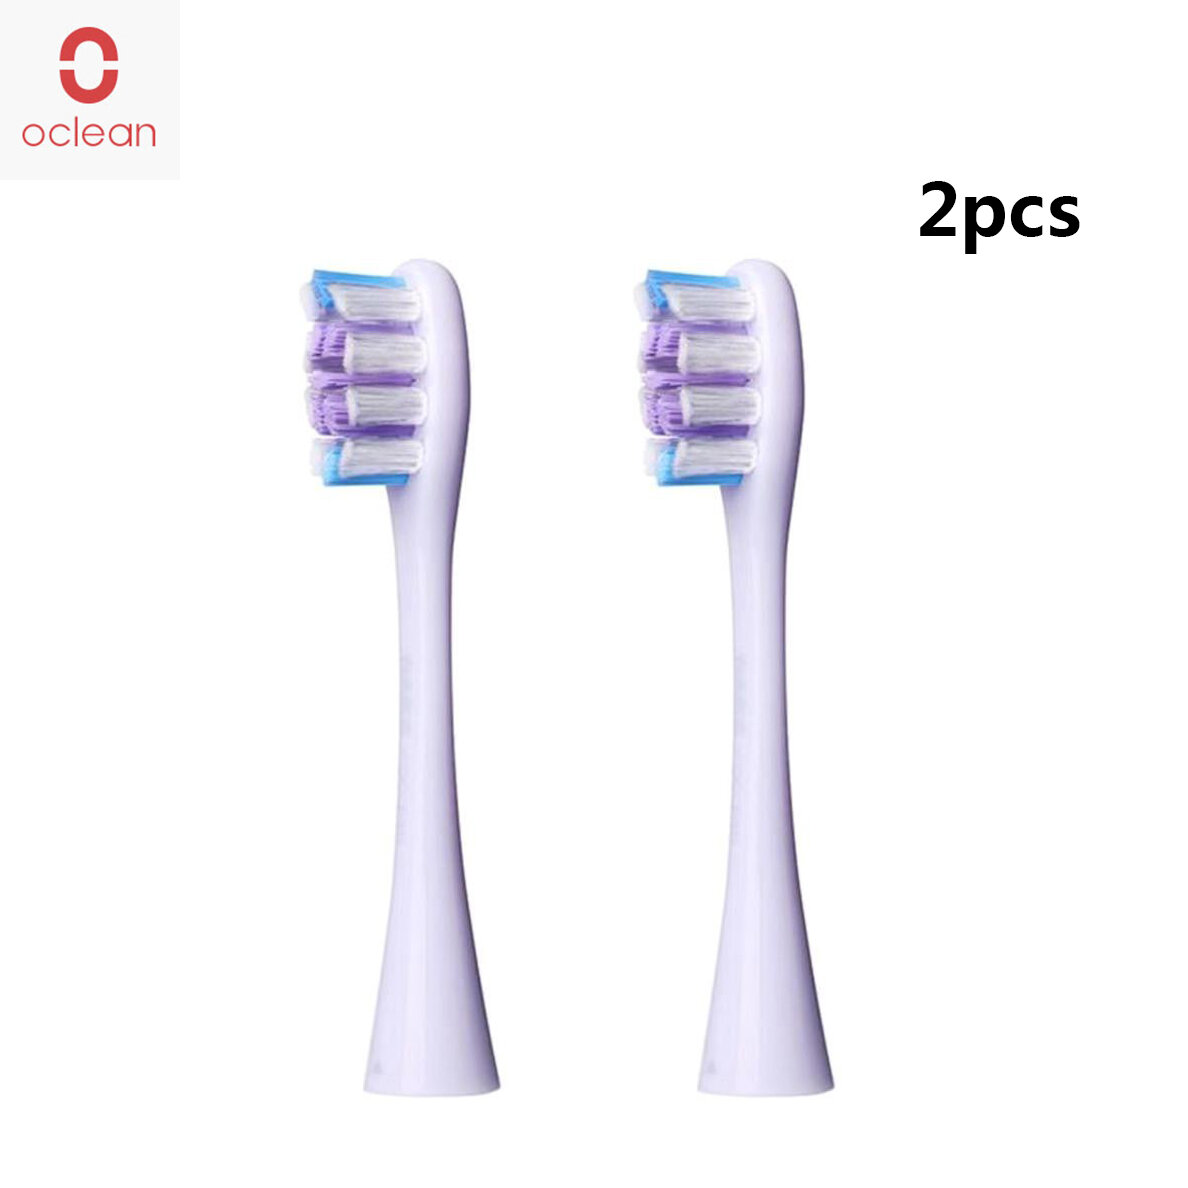 2PCS Oclean P2G Replacement Brush Heads Suitable for All Oclean Toothbrush Models - Light Purple